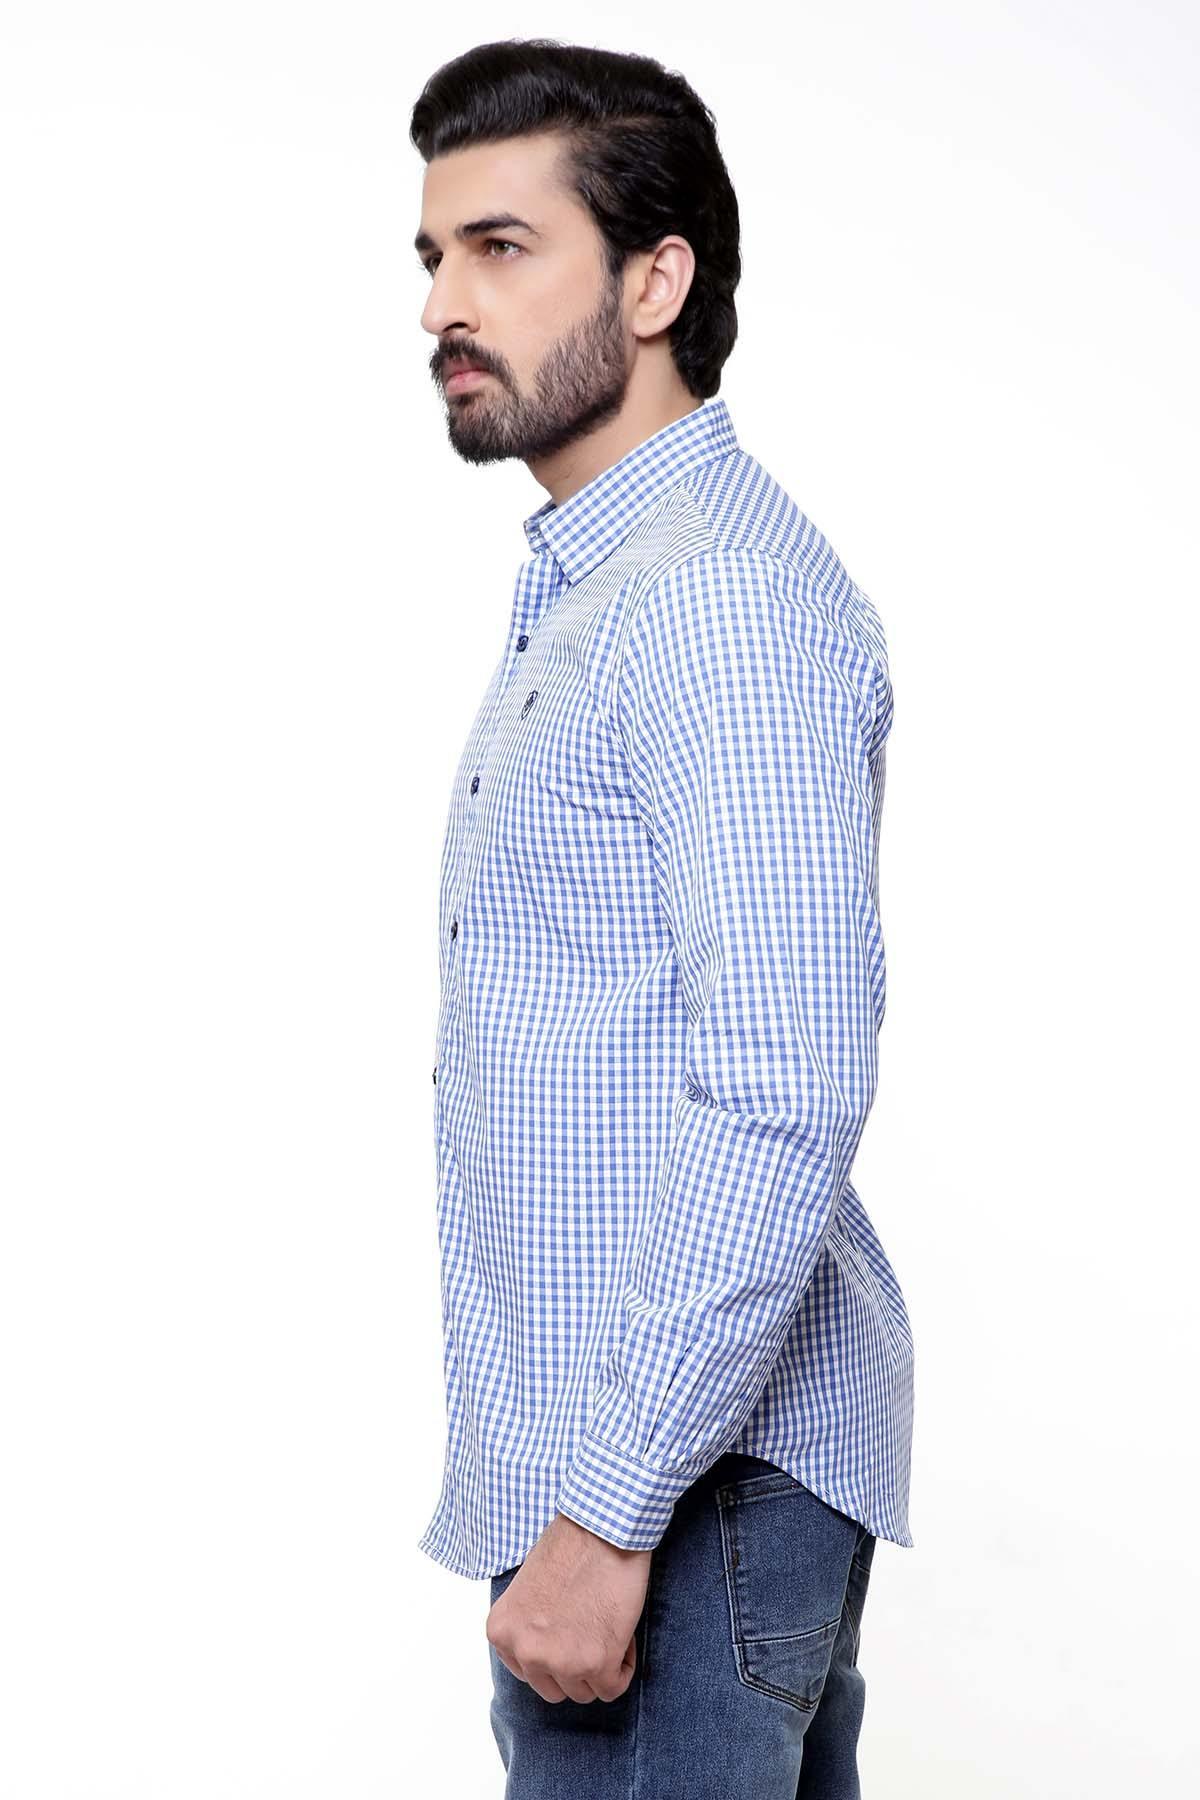 CASUAL SHIRT FULL SLEEVE WHITE BLUE CHECK at Charcoal Clothing